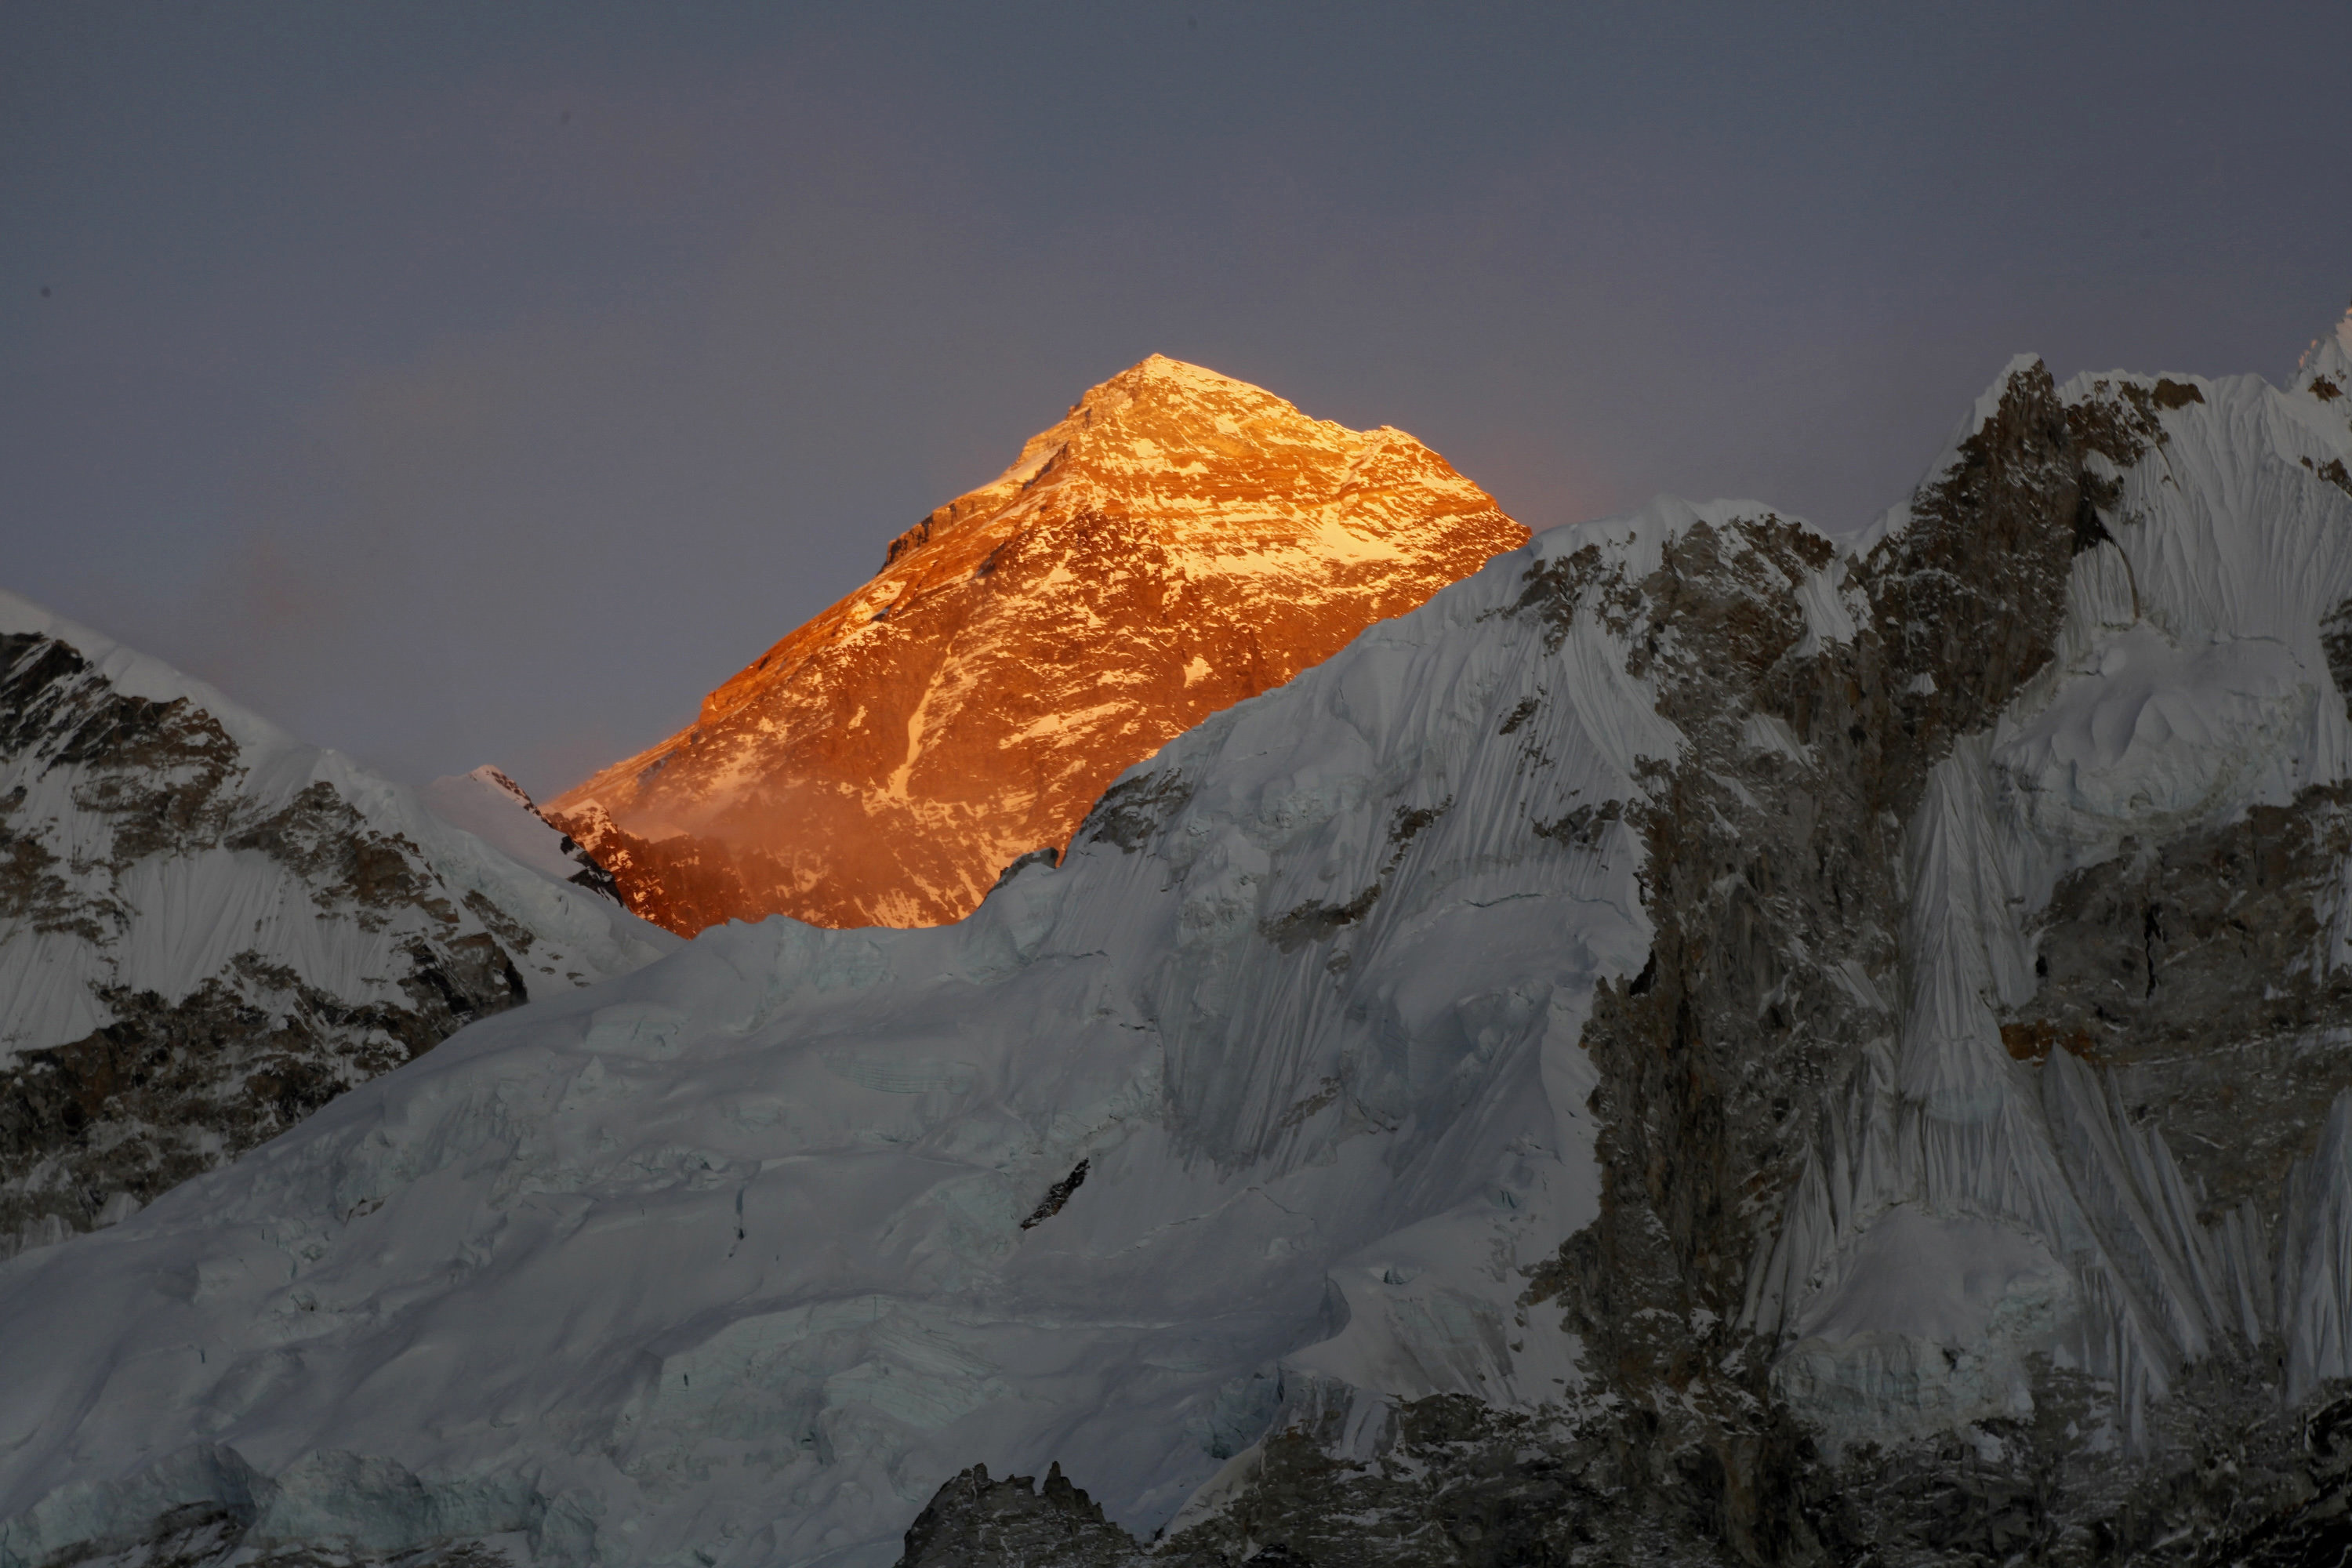 FILE - In this Nov. 12, 2015, file photo, Mt. Everest is seen from the way to Kalapatthar in Nepal. An American climber has died near the summit of Mount Everest and an Indian climber is missing after heading down from the mountain following a successful ascent, expedition organizers said Sunday.